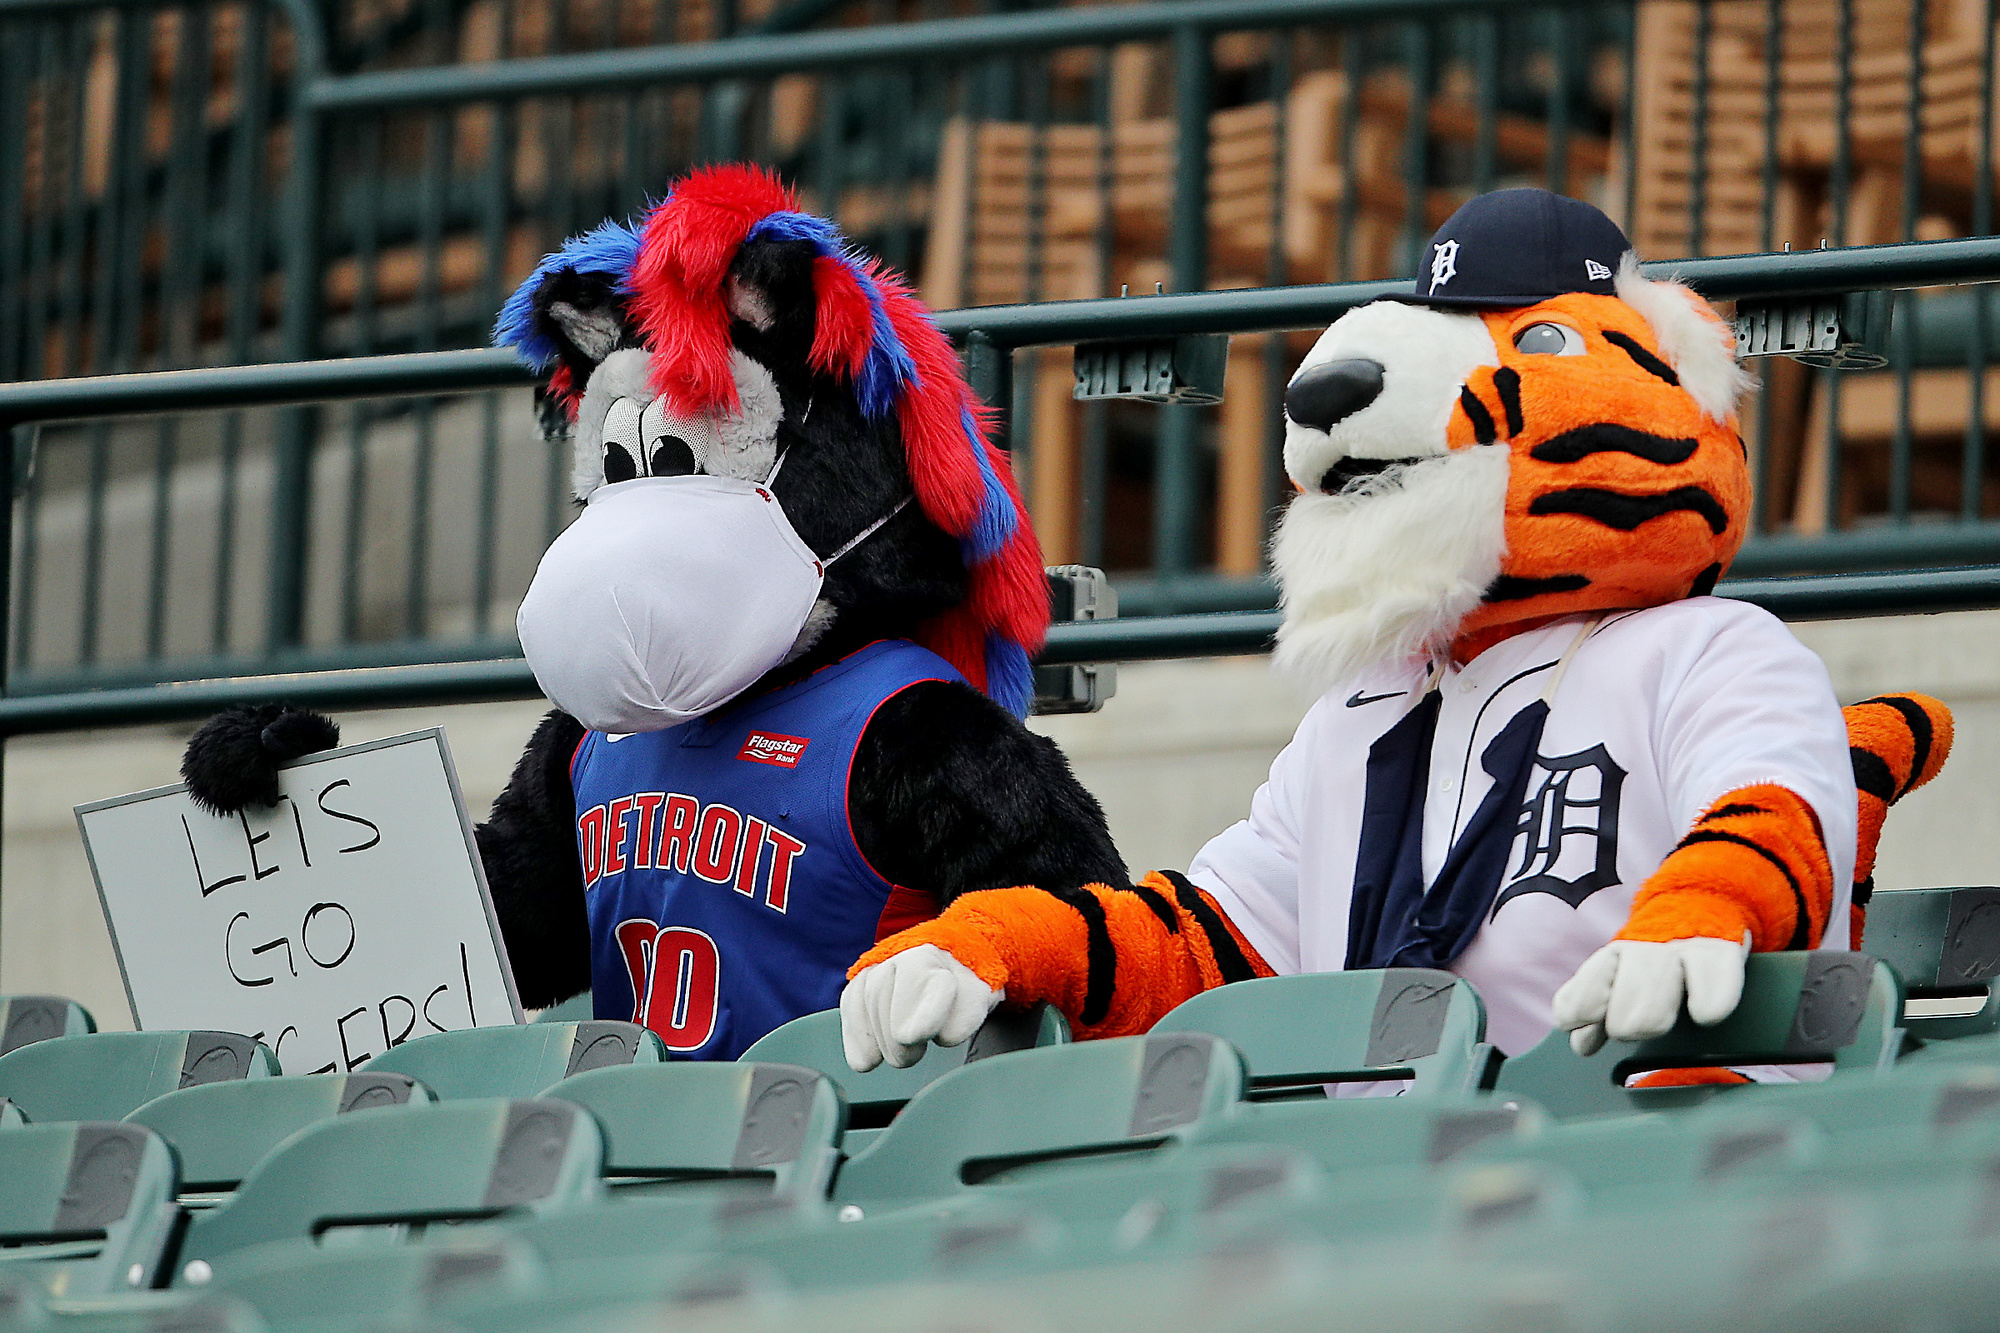 Tigers' TV ratings surge in 2020 amid pandemic 